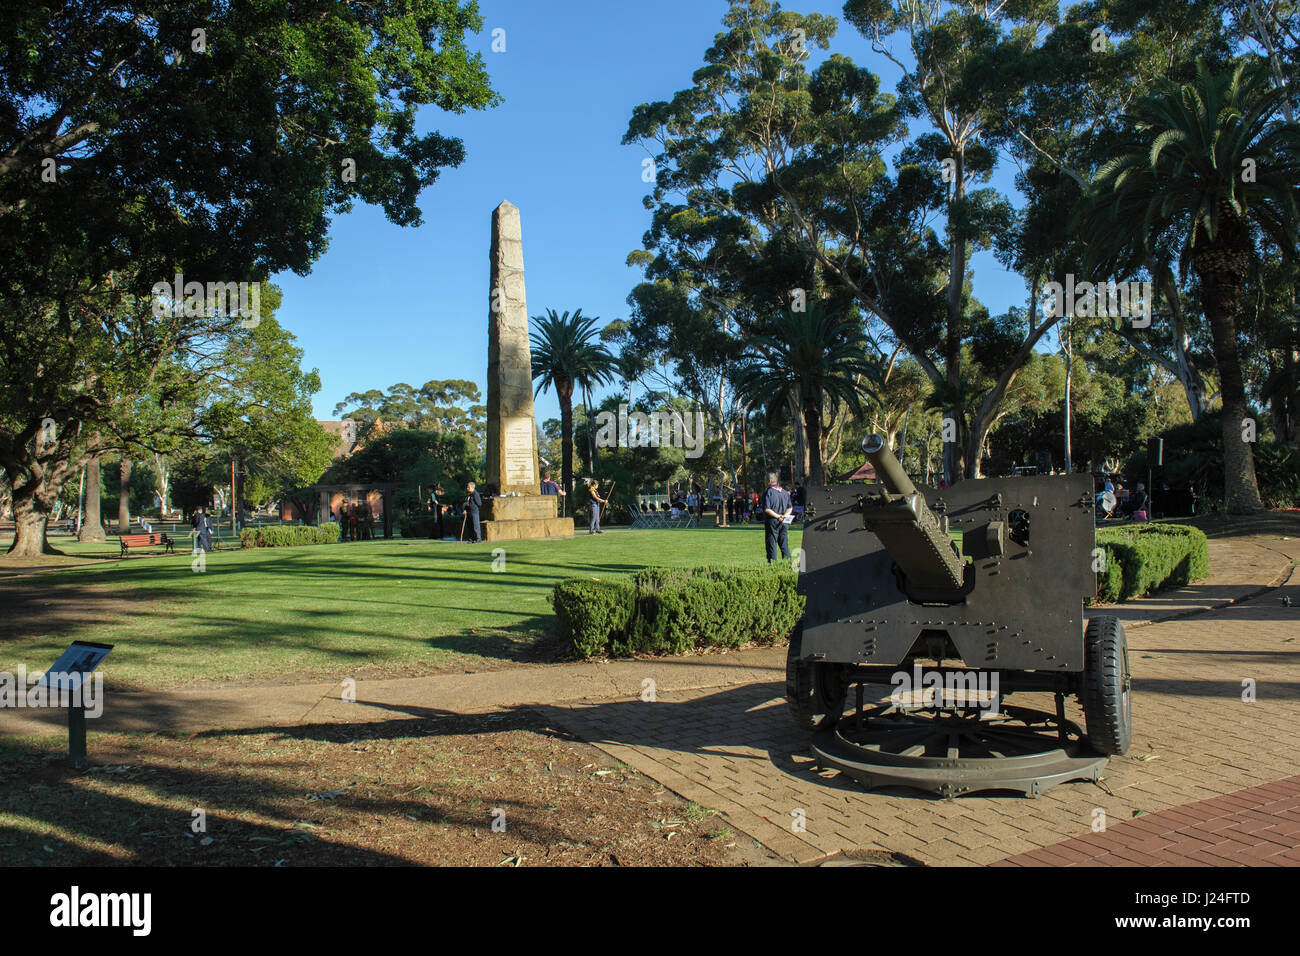 Guildford, Perth, Western Australia, Australia. 25th April, 2017. Preparations underway at the Guildford War Memorial in preparation for the traditional ANZAC Day service.  Sheldon Levis/Alamy Live News Stock Photo